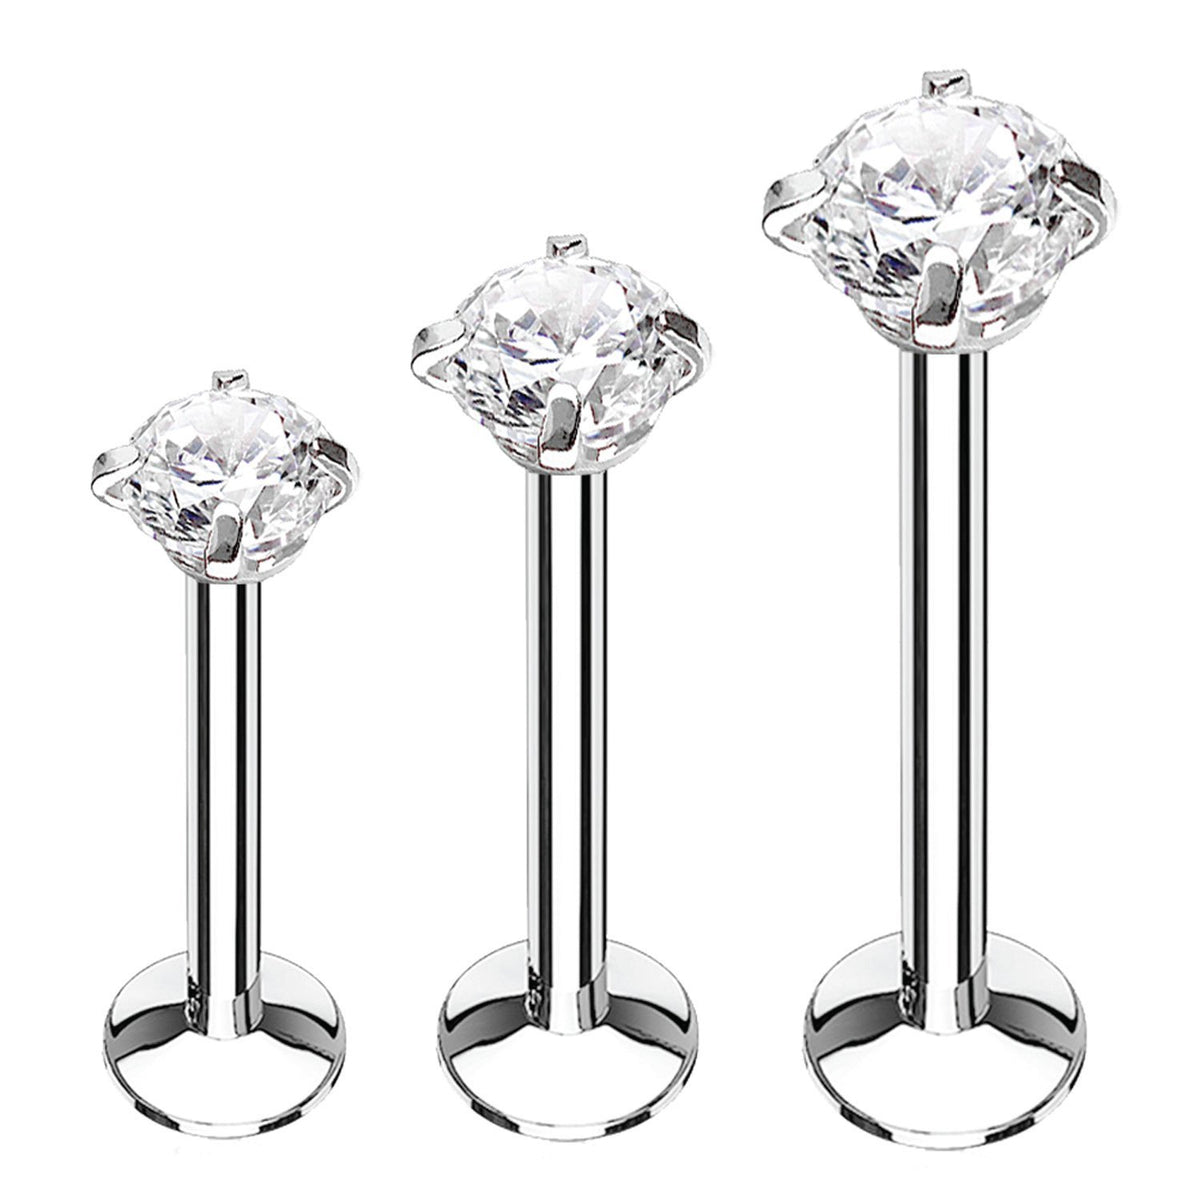 3PC Labret Stud Tragus Earring Set 16G CZ Crystal Surgical Steel